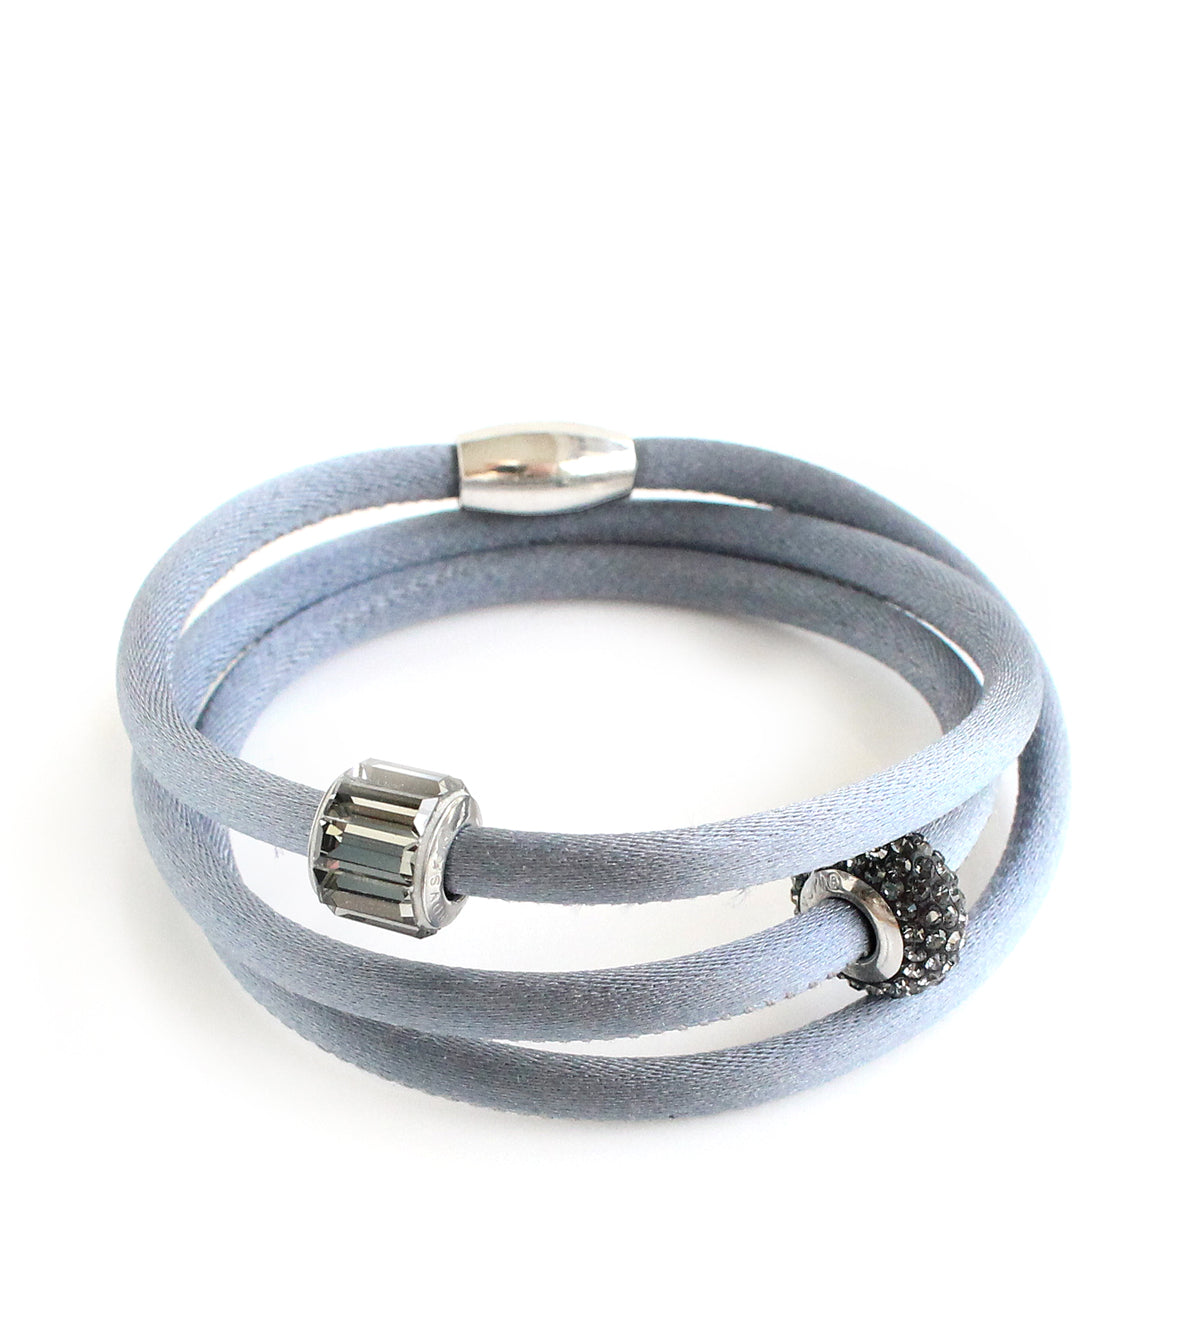 TI SENTO MILANO BRACELET Silver And Turquoise Silk Cord - Michalopoulos  Jewellery